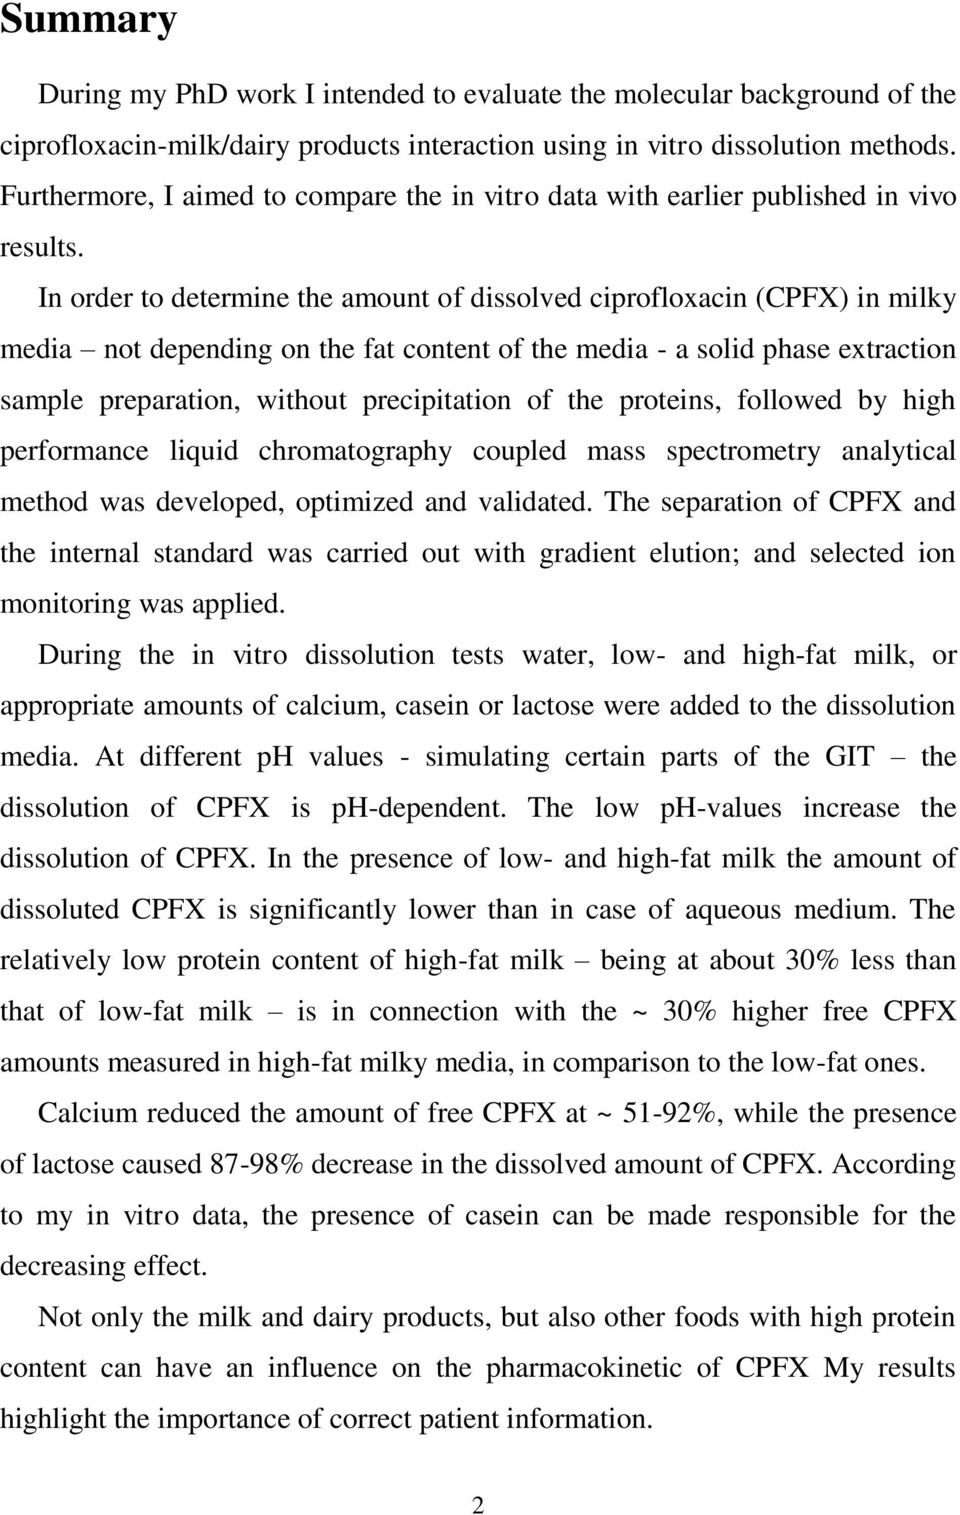 In order to determine the amount of dissolved ciprofloxacin (CPFX) in milky media not depending on the fat content of the media - a solid phase extraction sample preparation, without precipitation of